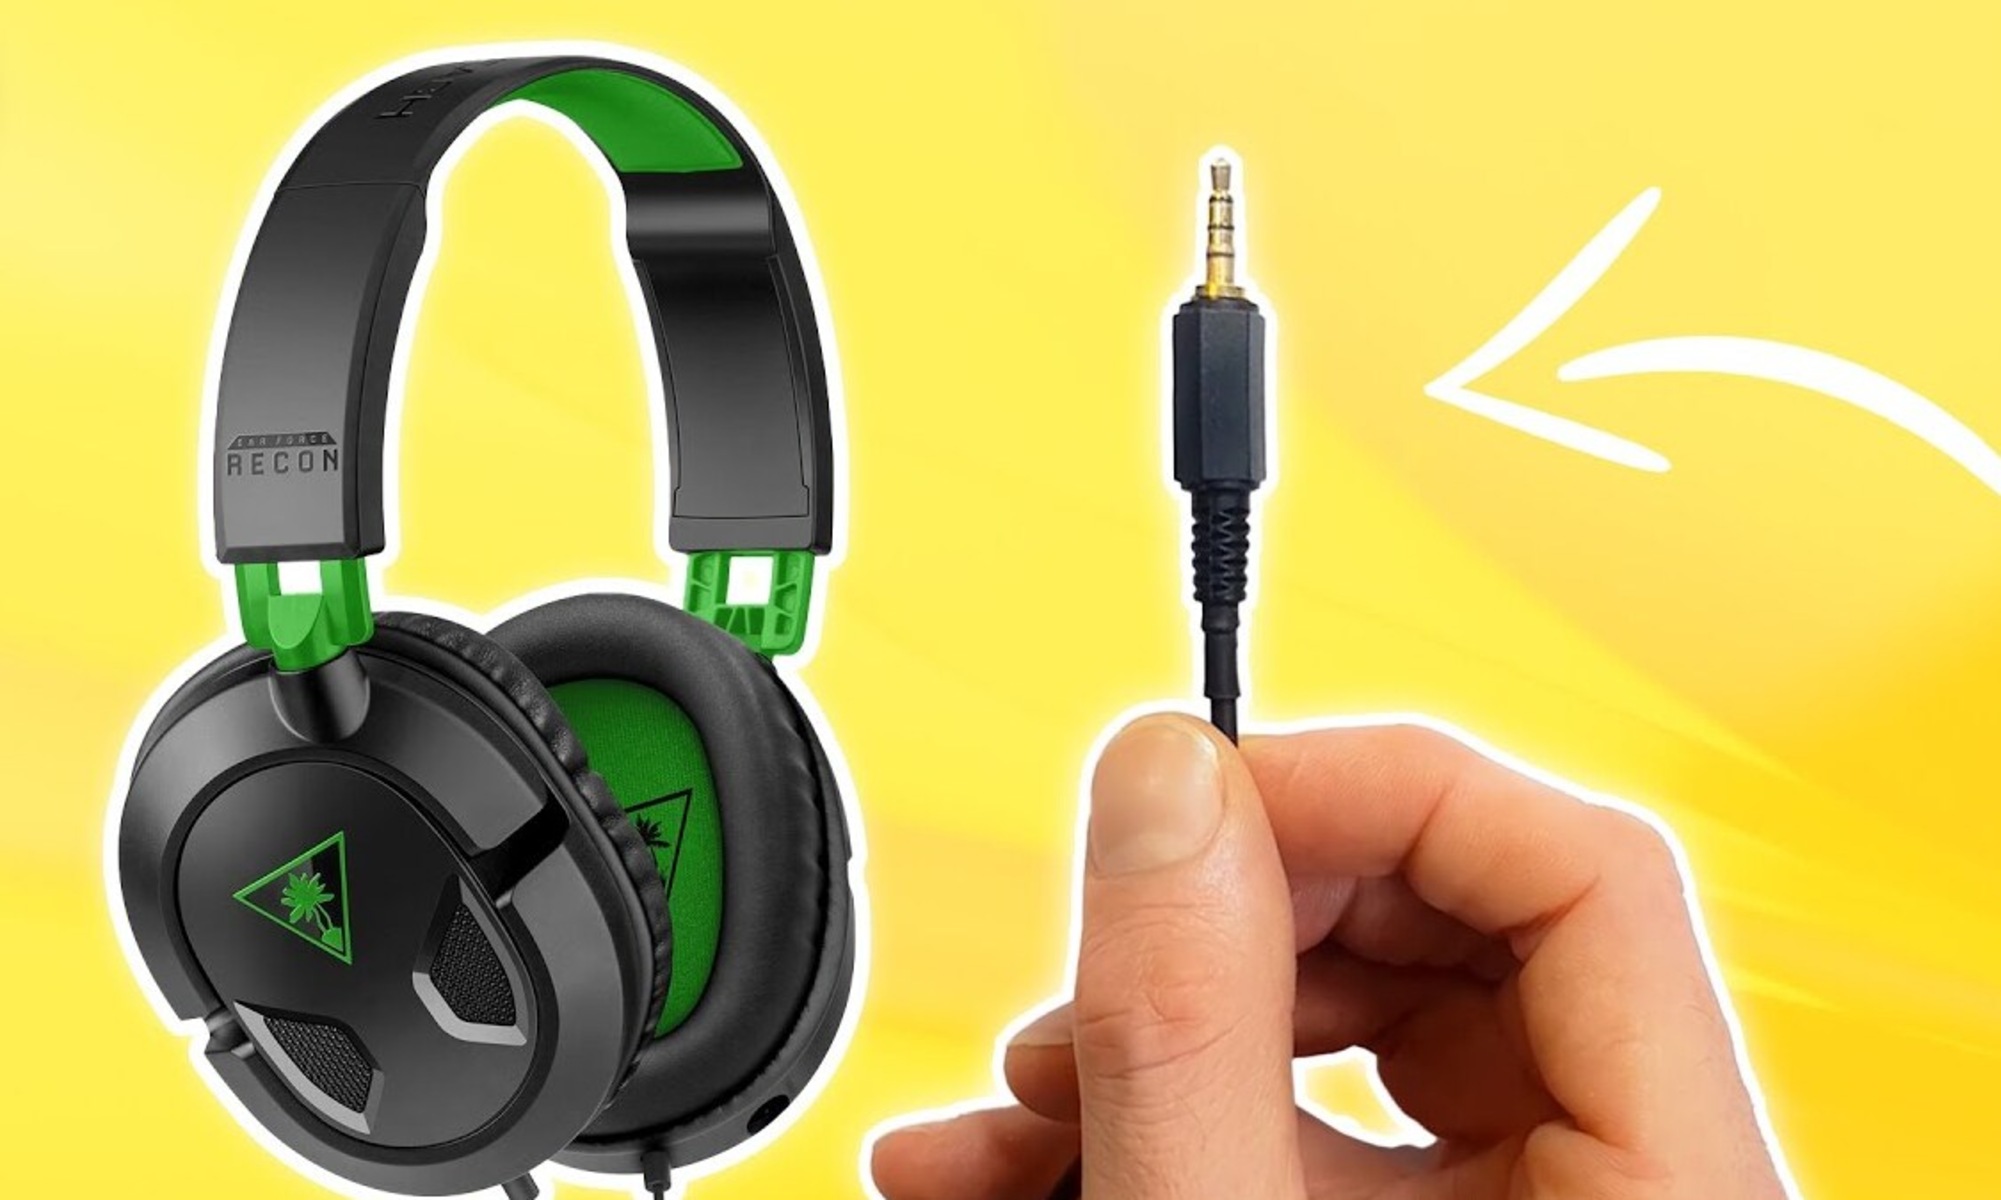 How To Fix A Turtlebeach Gaming Headset